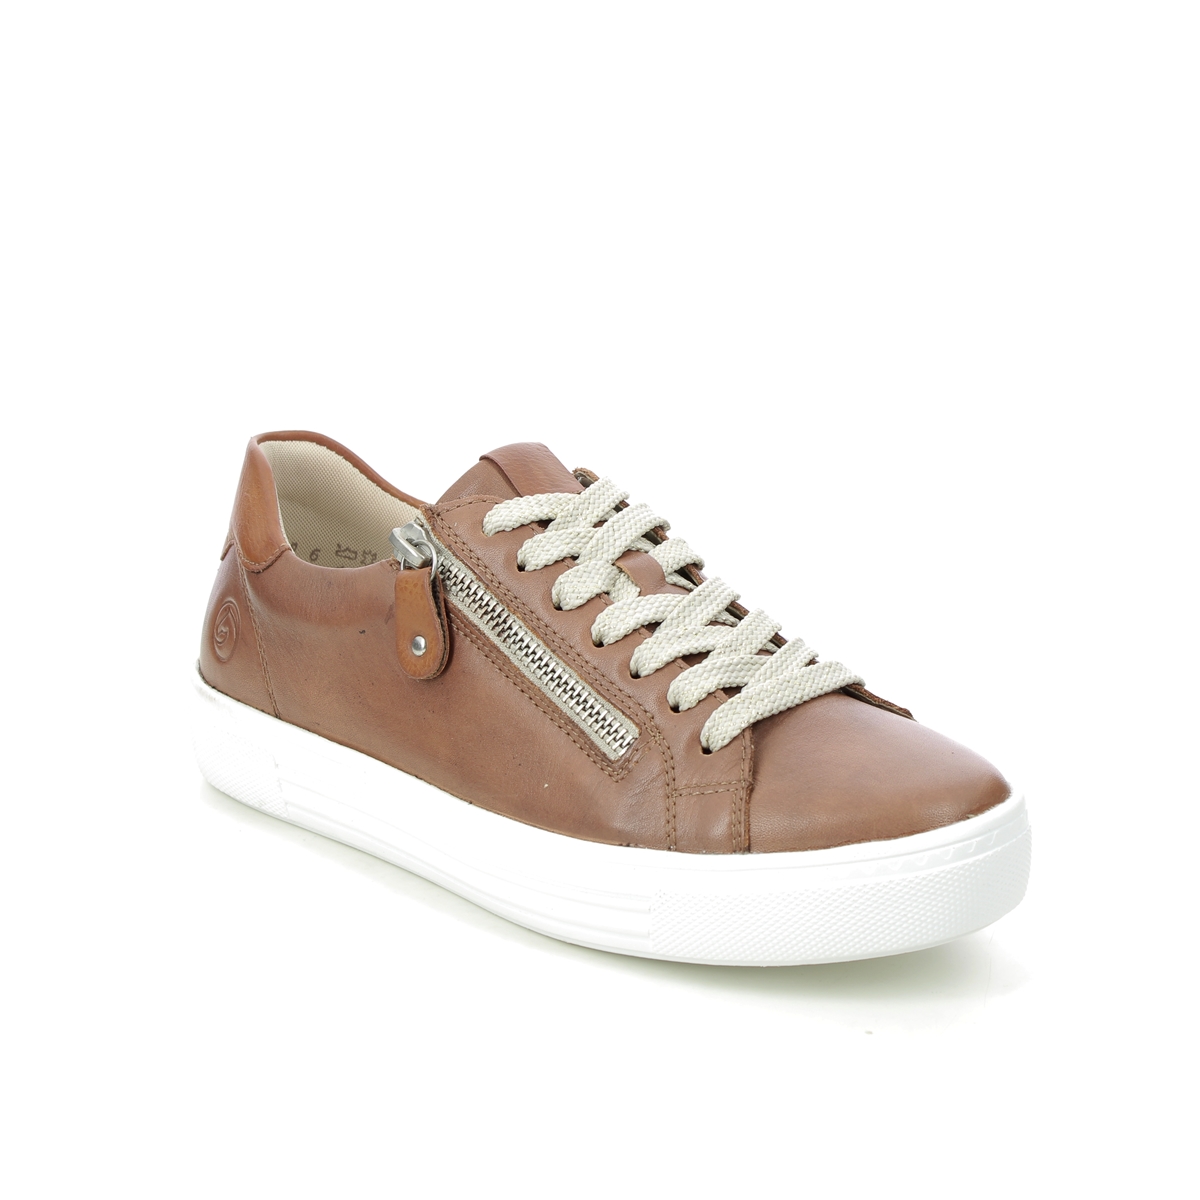 Remonte Altozip Tan Leather Womens Trainers D0903-24 In Size 41 In Plain Tan Leather